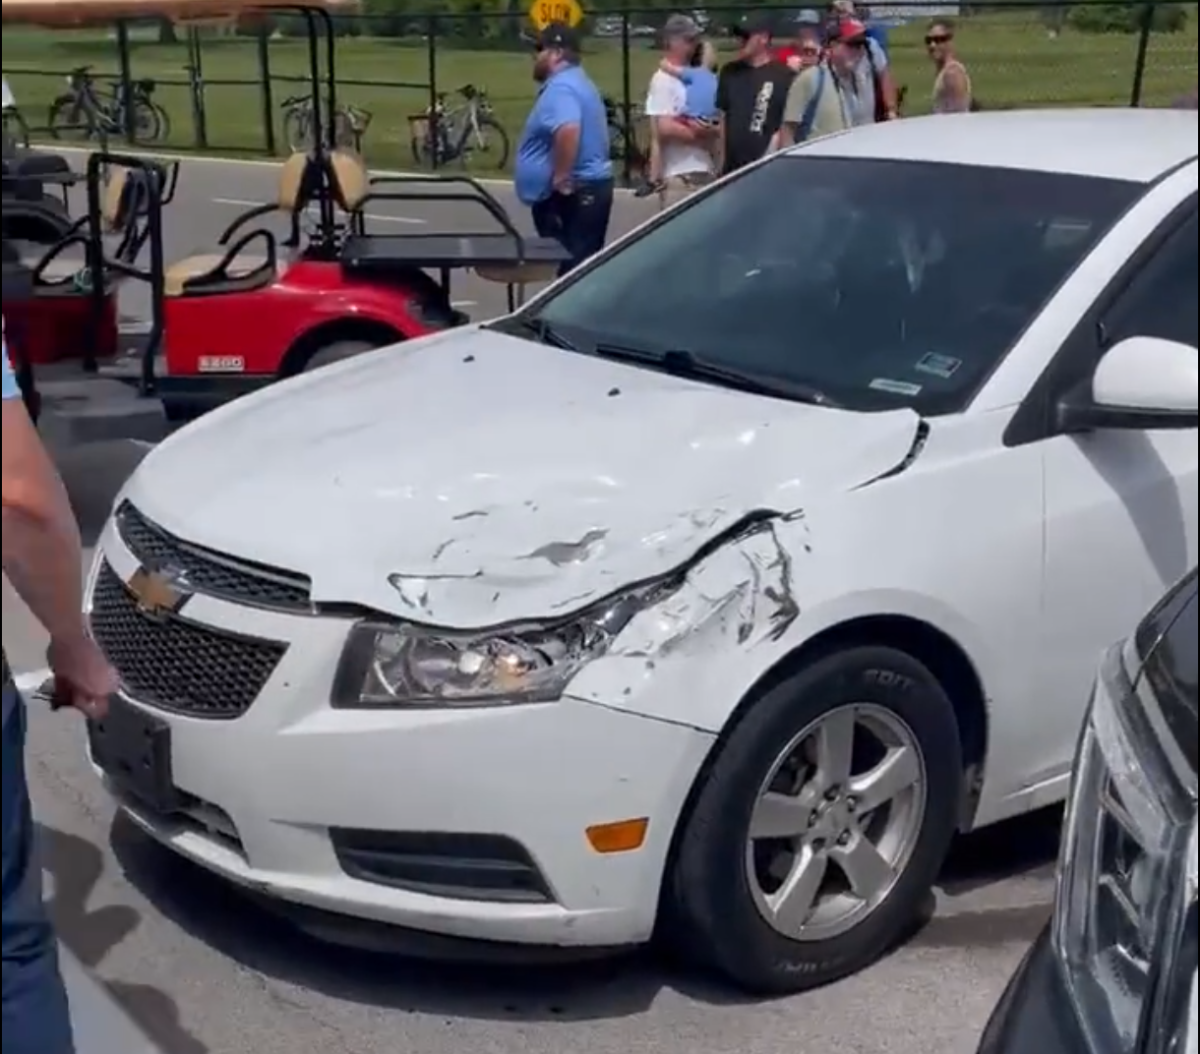 The flying tyre is said to have hit this Chevrolet Cruze. Picture: Andrew Kossack Twitter